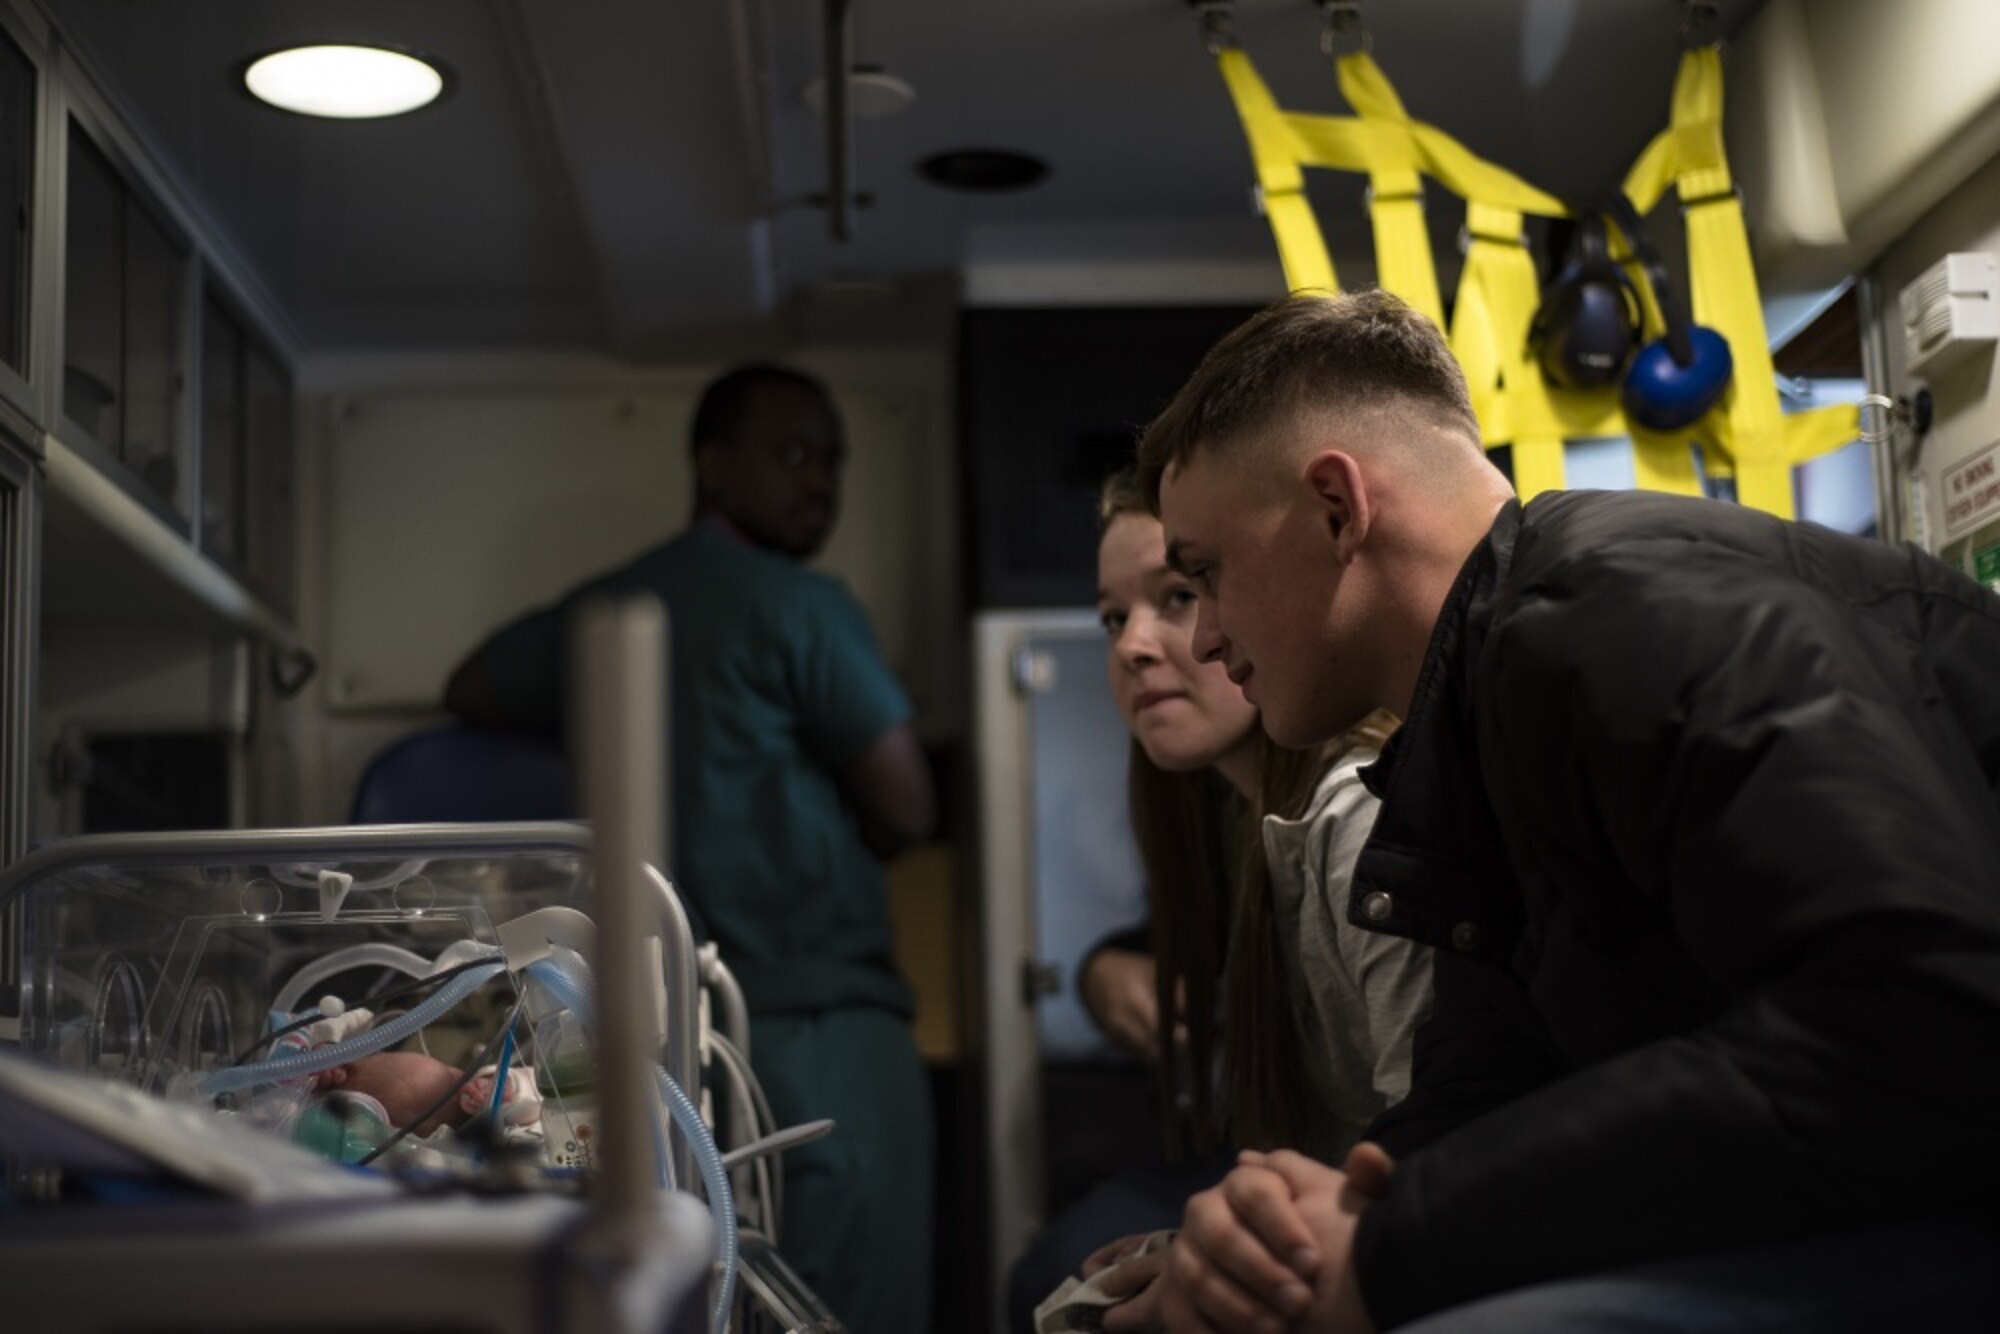 Parents, Specialist Cody McFall and Private First Class Cheyenne Evans, U.S. Army Camp Walker, Republic of Korea, 188th Military Police Company soldiers, look on as one of their newborn twins sleeps before an aeromedical evacuation mission, March 30, 2020, at Osan Air Base, Republic of Korea.